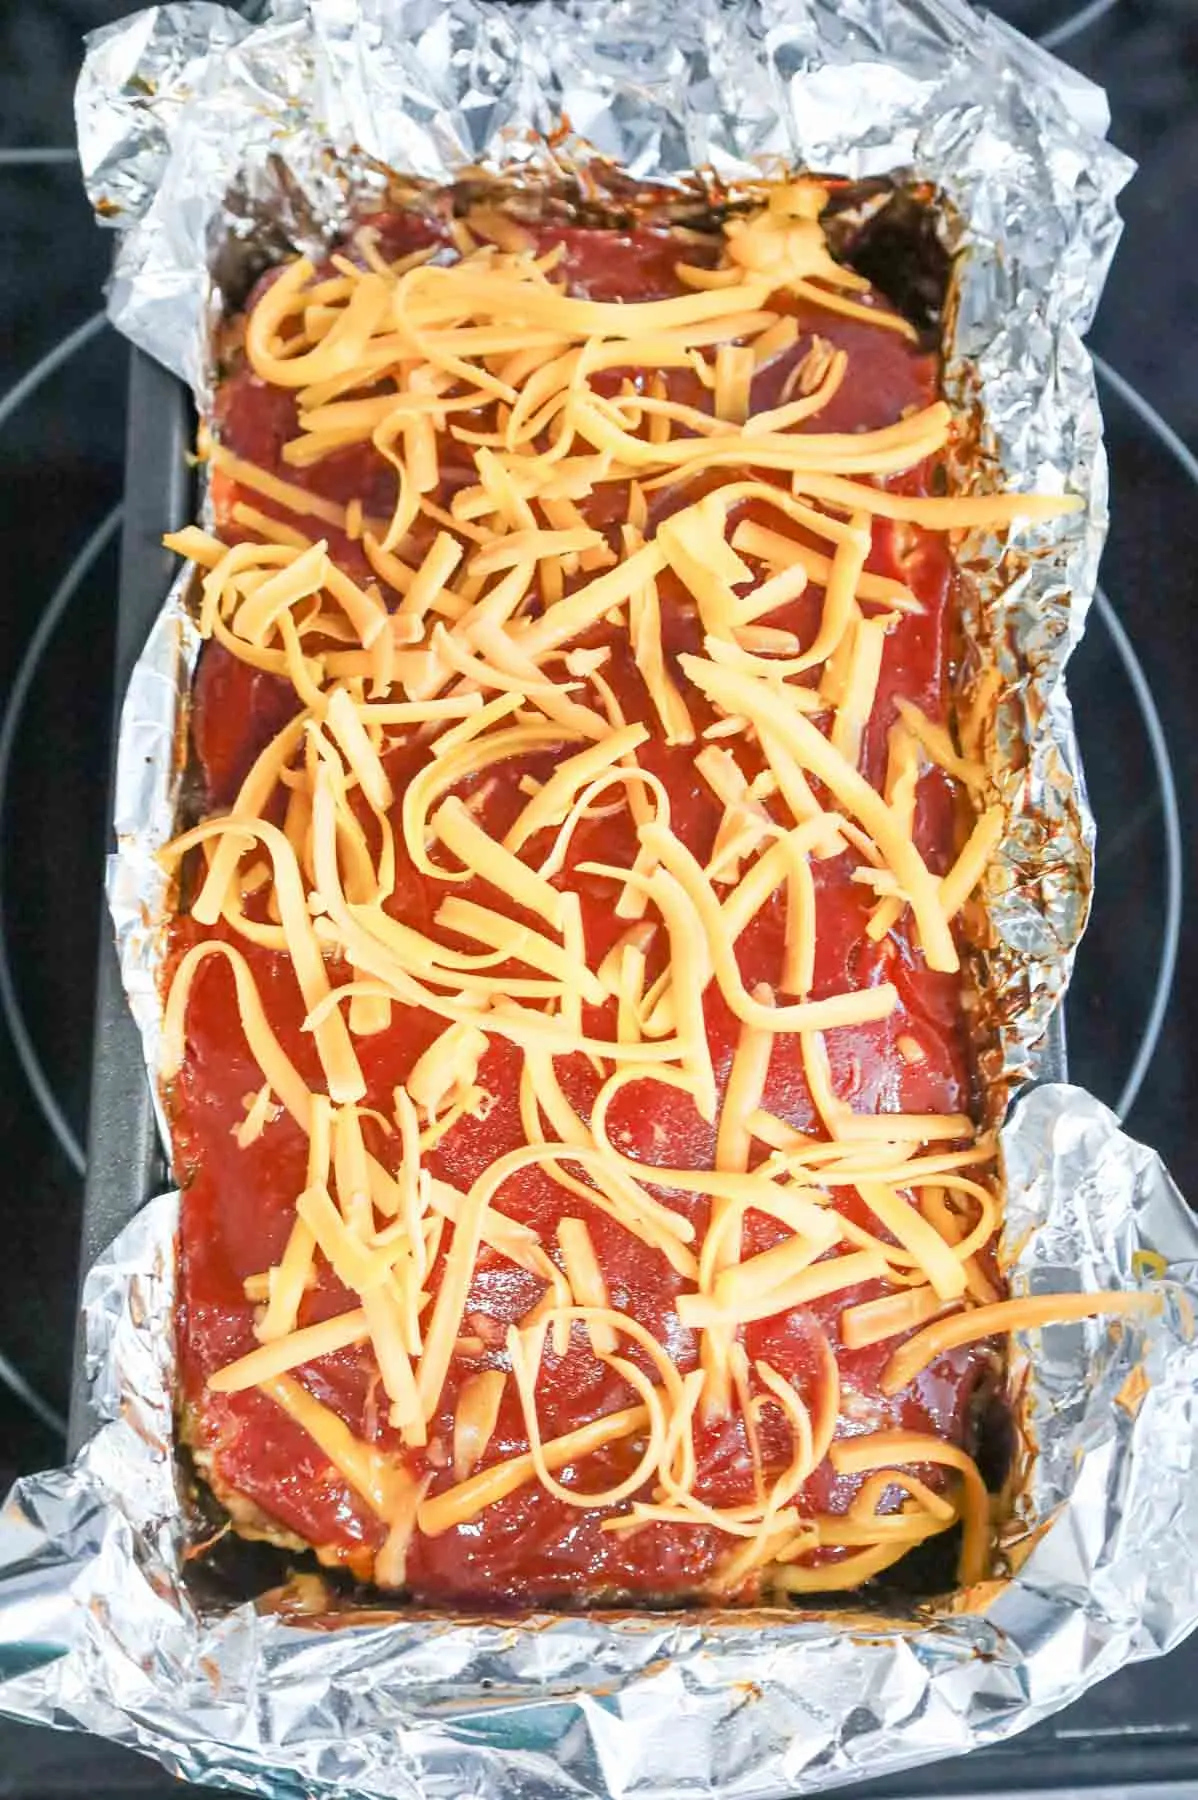 shredded cheddar cheese on top of meatloaf